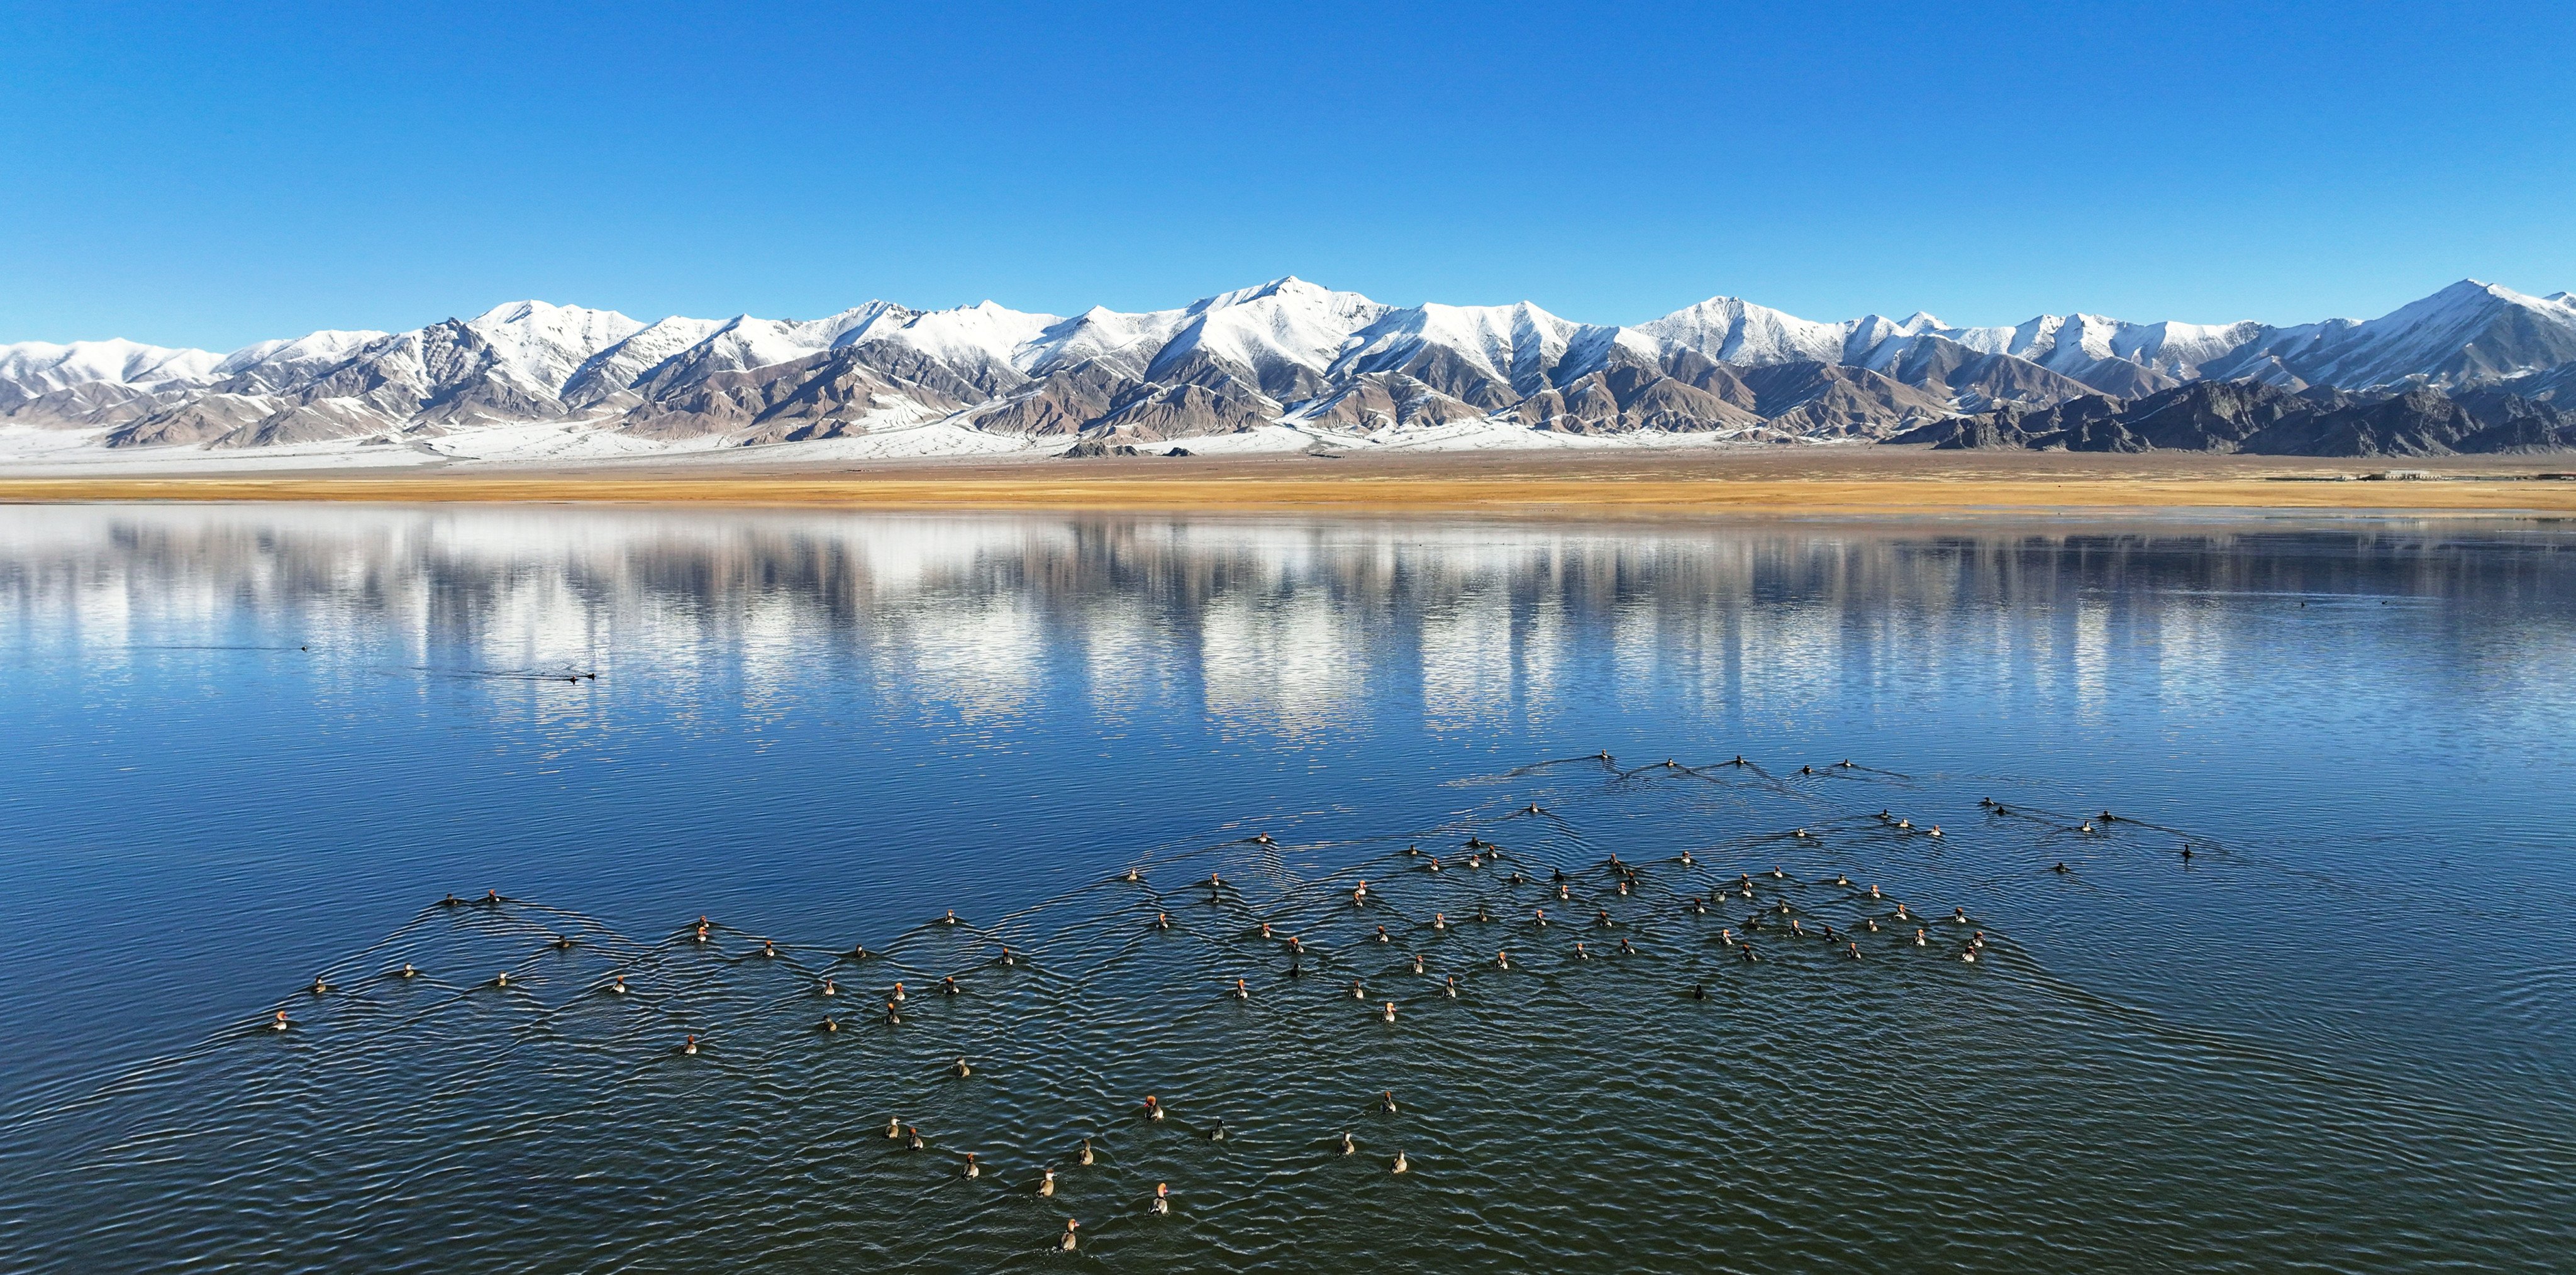 Water birds resting on a lake at the Altun Mountains National Nature Reserve in northwest China’s Xinjiang Uygur autonomous region. Photo: Xinhua